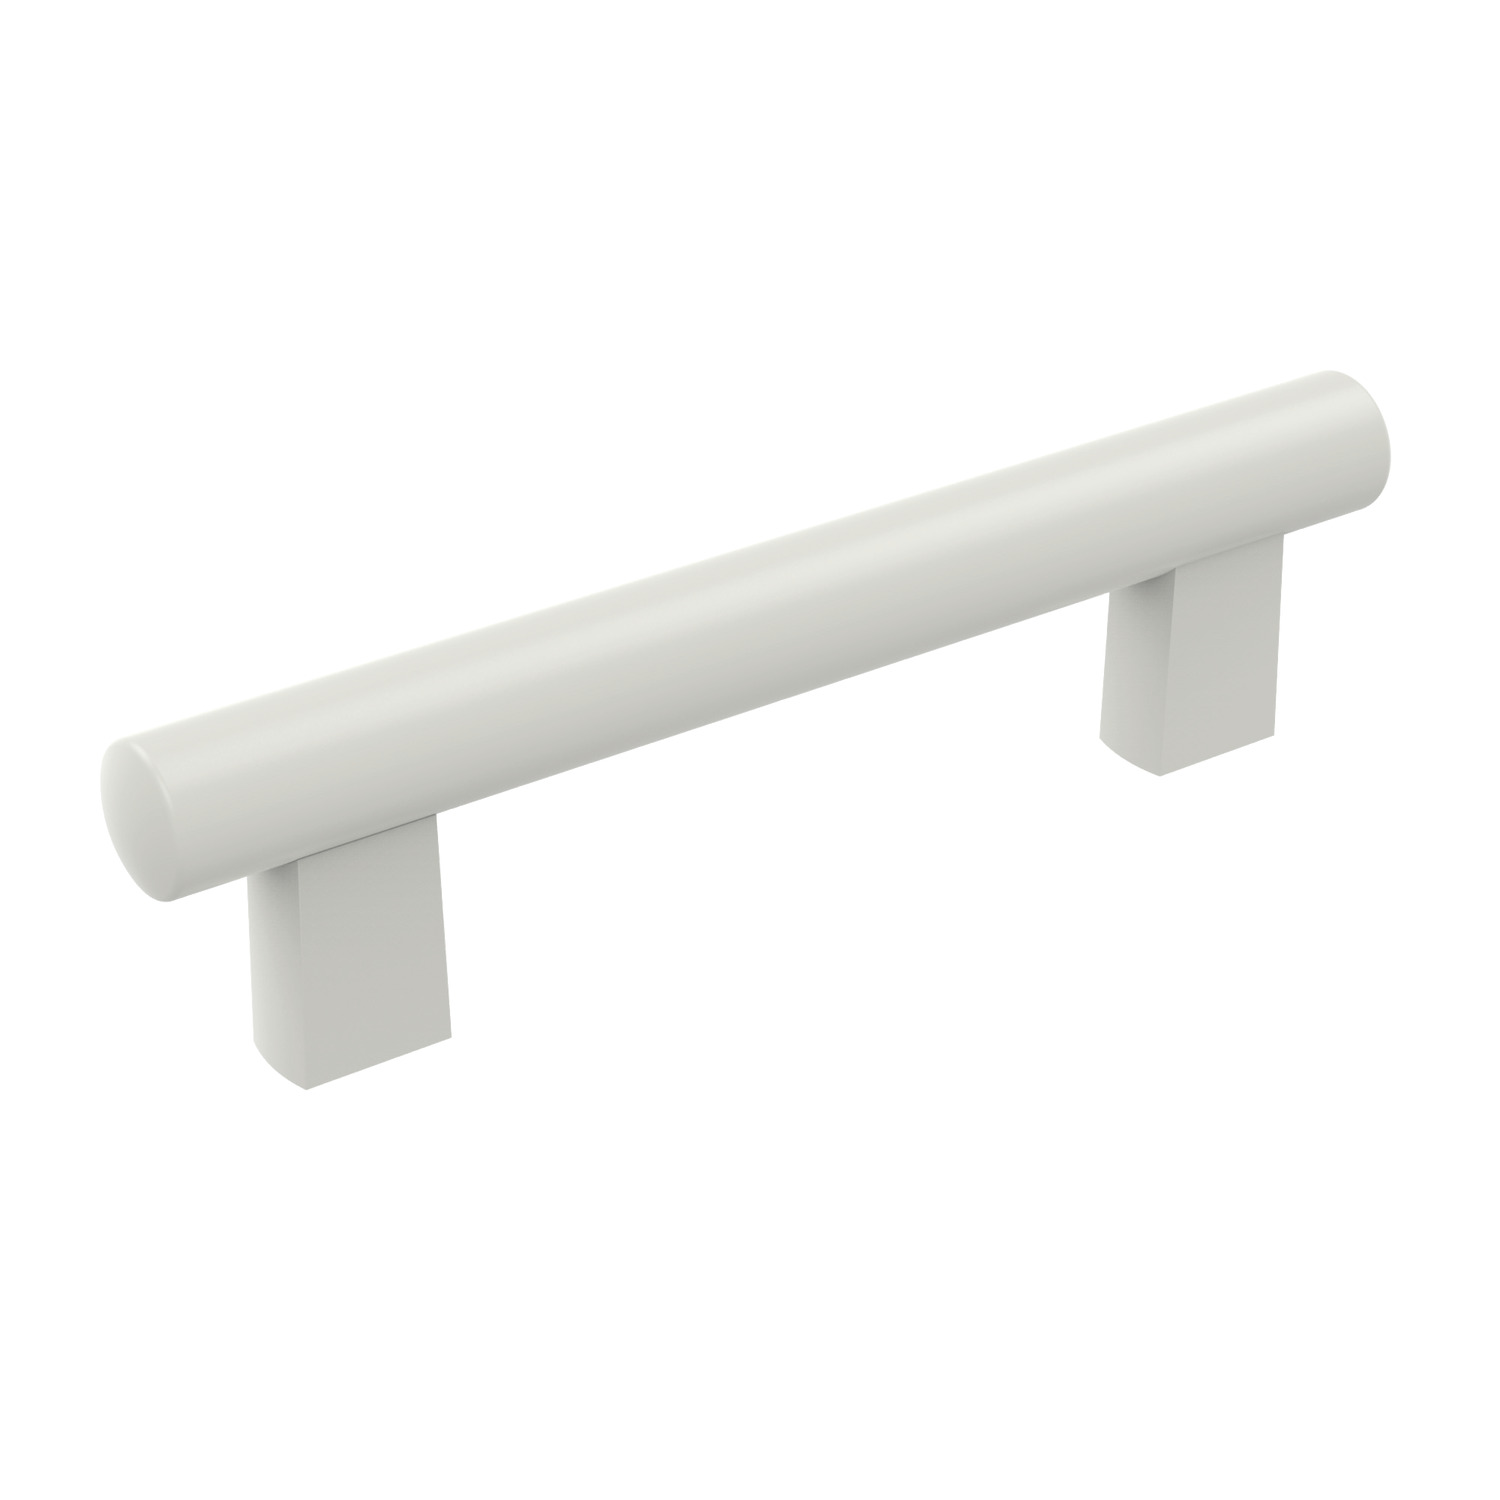 Product 79930, Tube Pull Handles Clean line / 